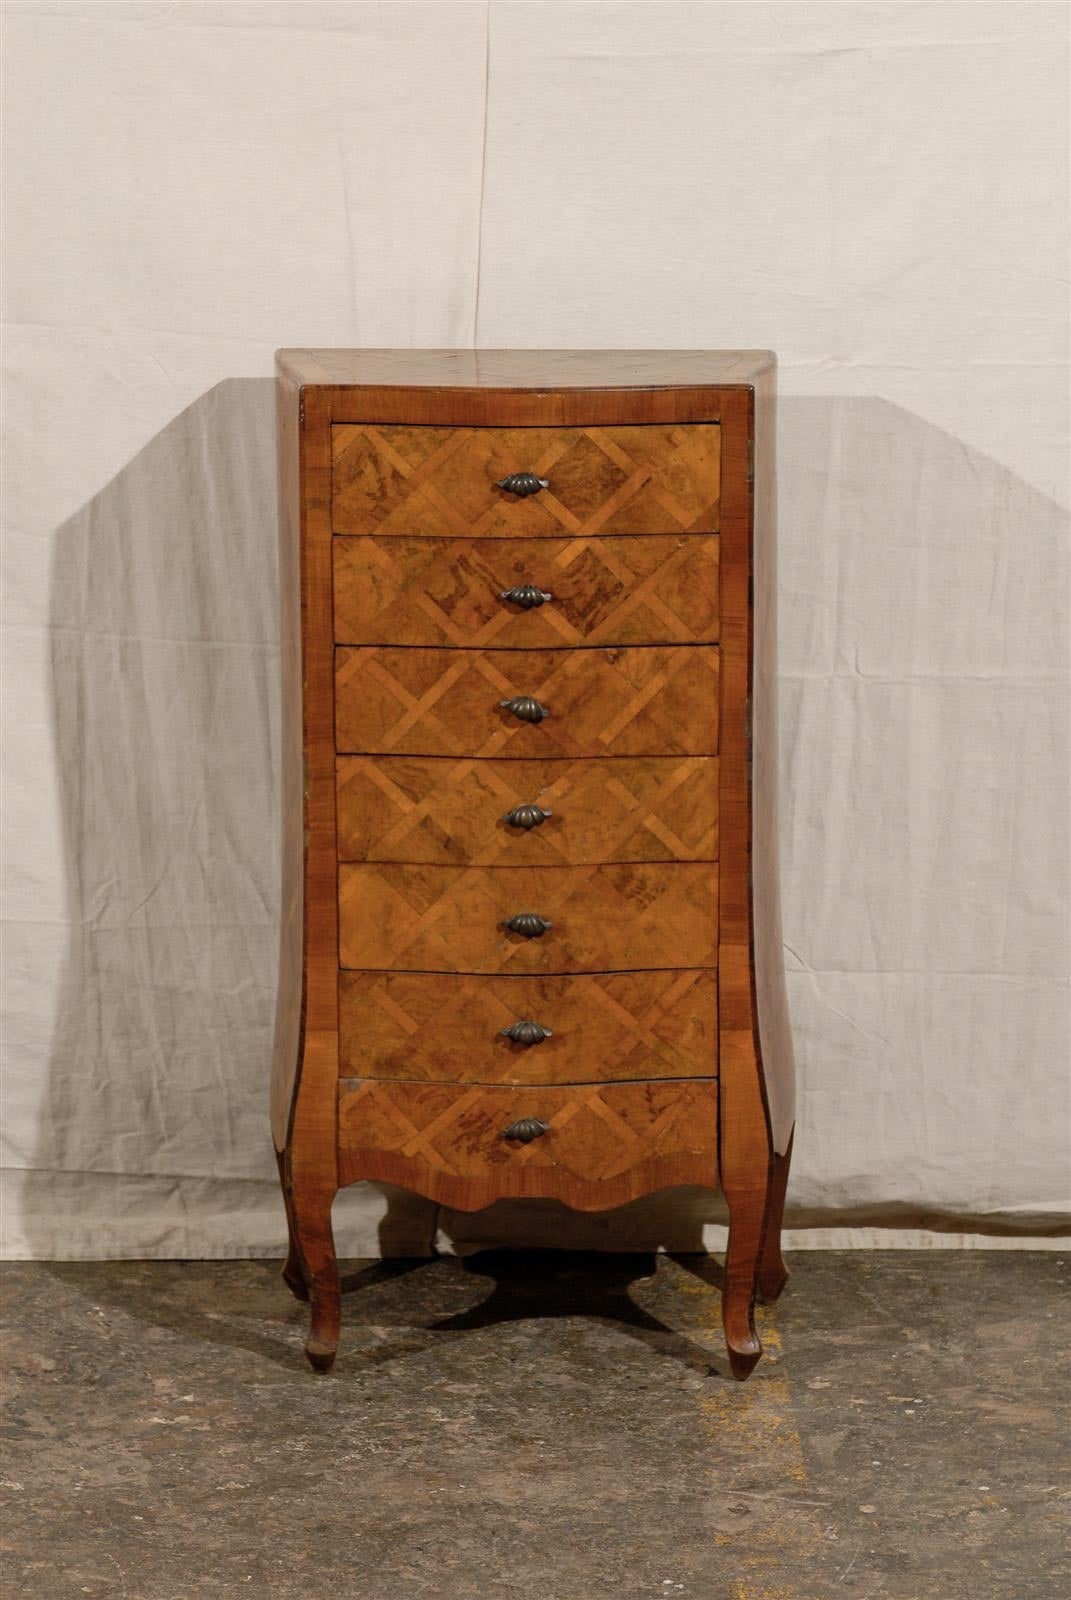 A lovely Italian olive wood marquetry semainier (seven-drawer tall chest) with canted sides, mid-20th century.